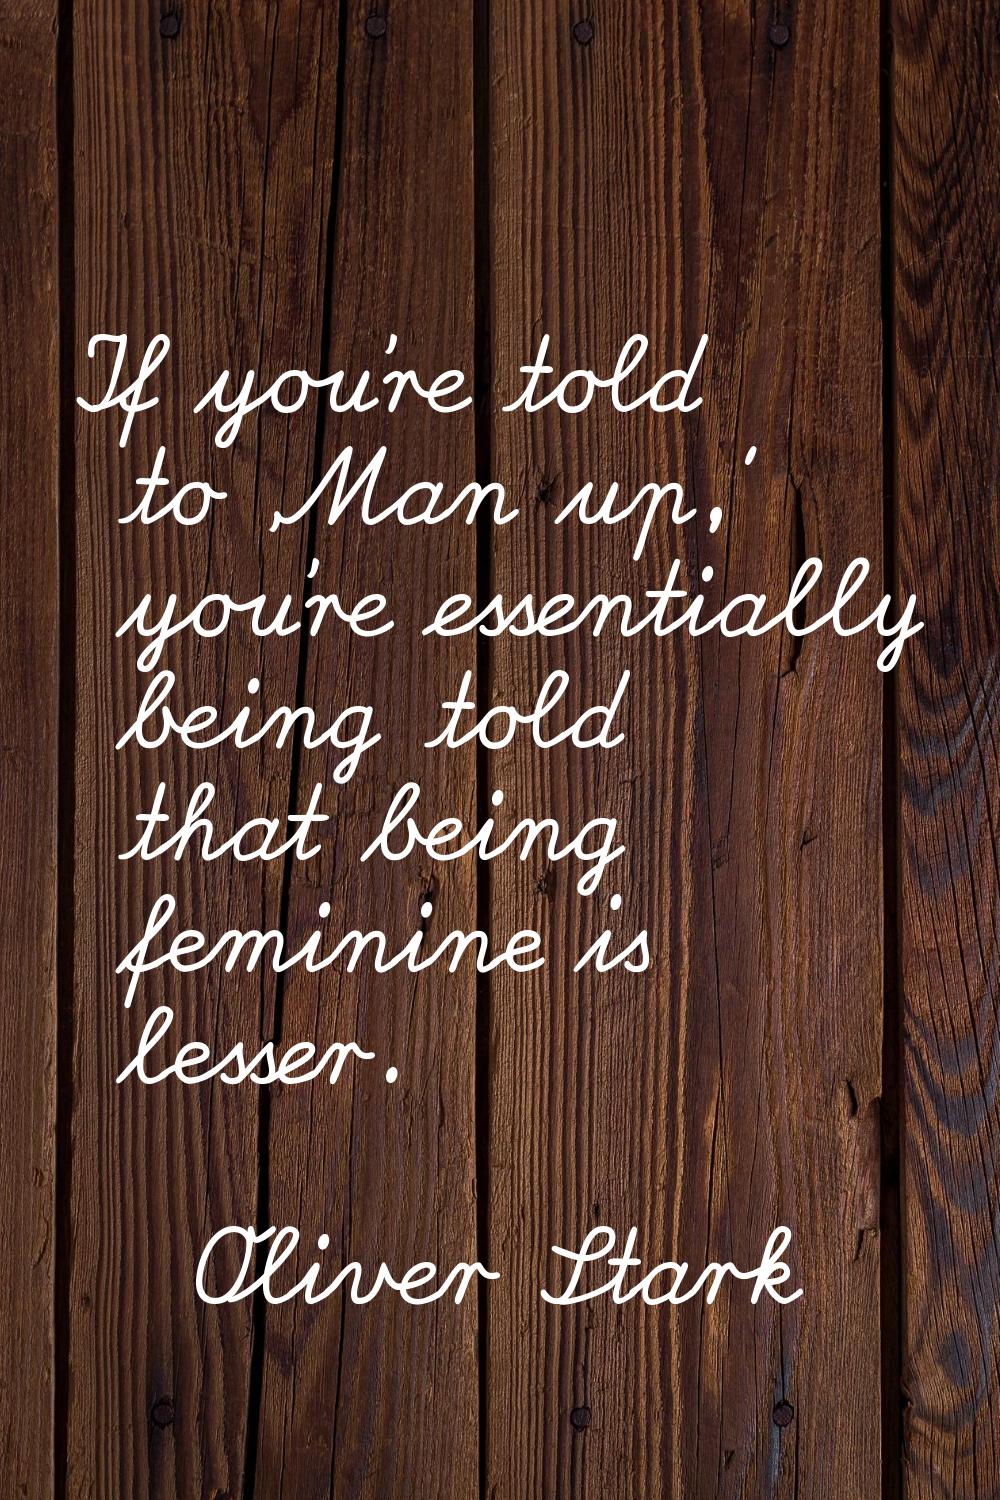 If you're told to 'Man up,' you're essentially being told that being feminine is lesser.